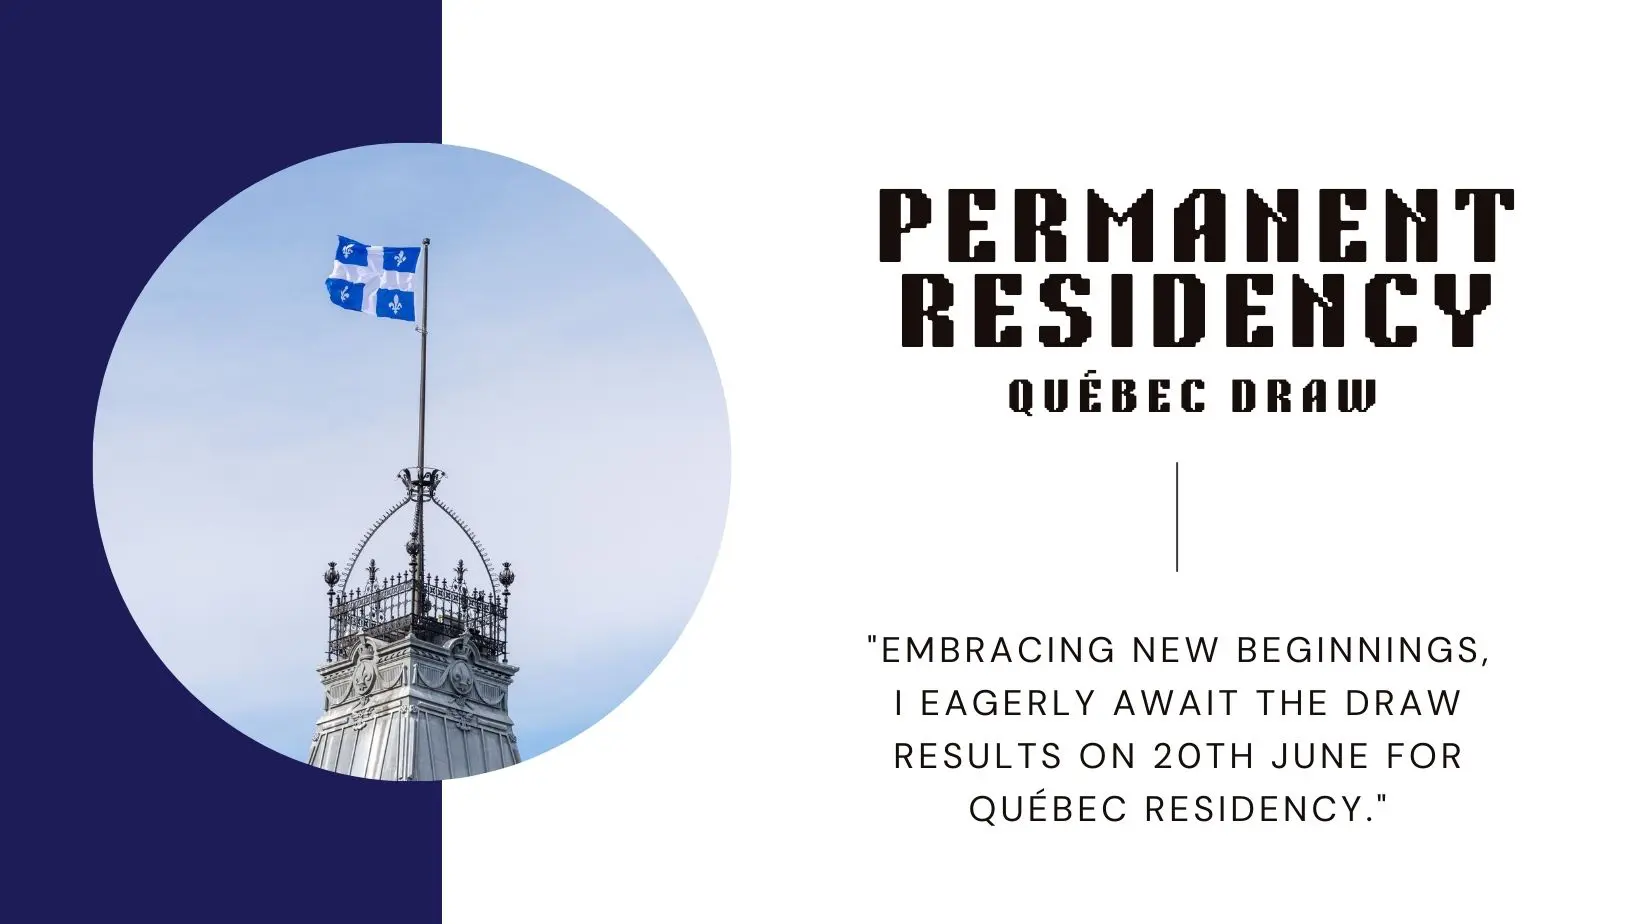 latest draw on 20th june for québec permanent residency.